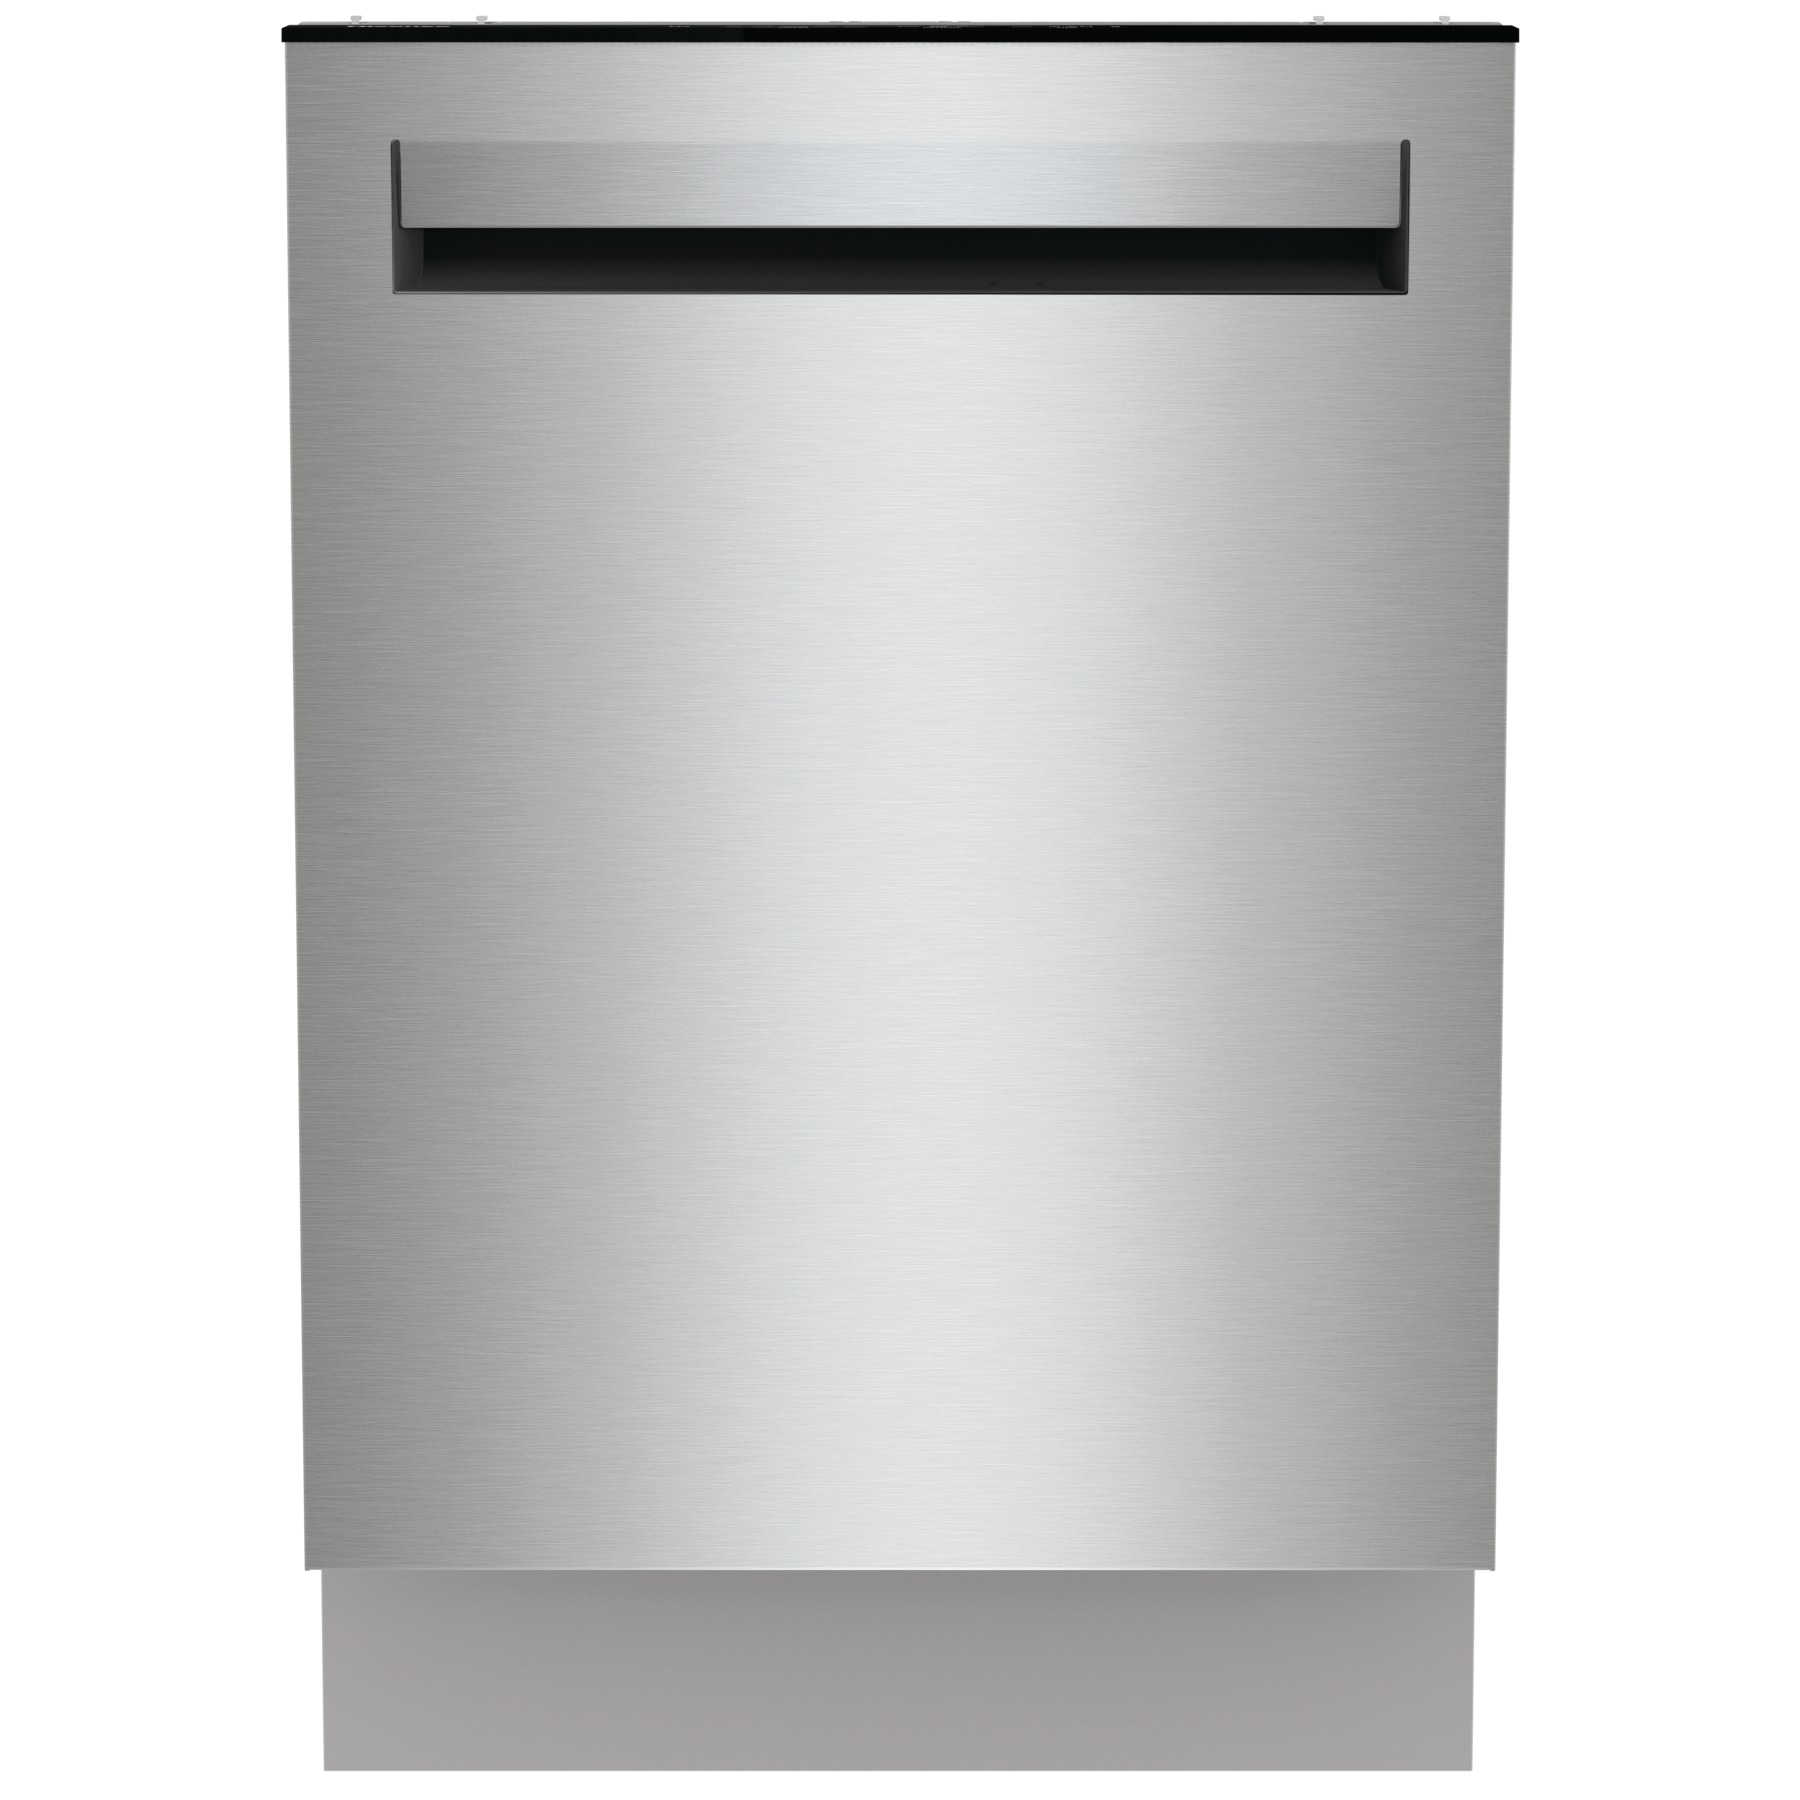 Hisense Top Control 24-in Built-In Dishwasher (Stainless Steel 